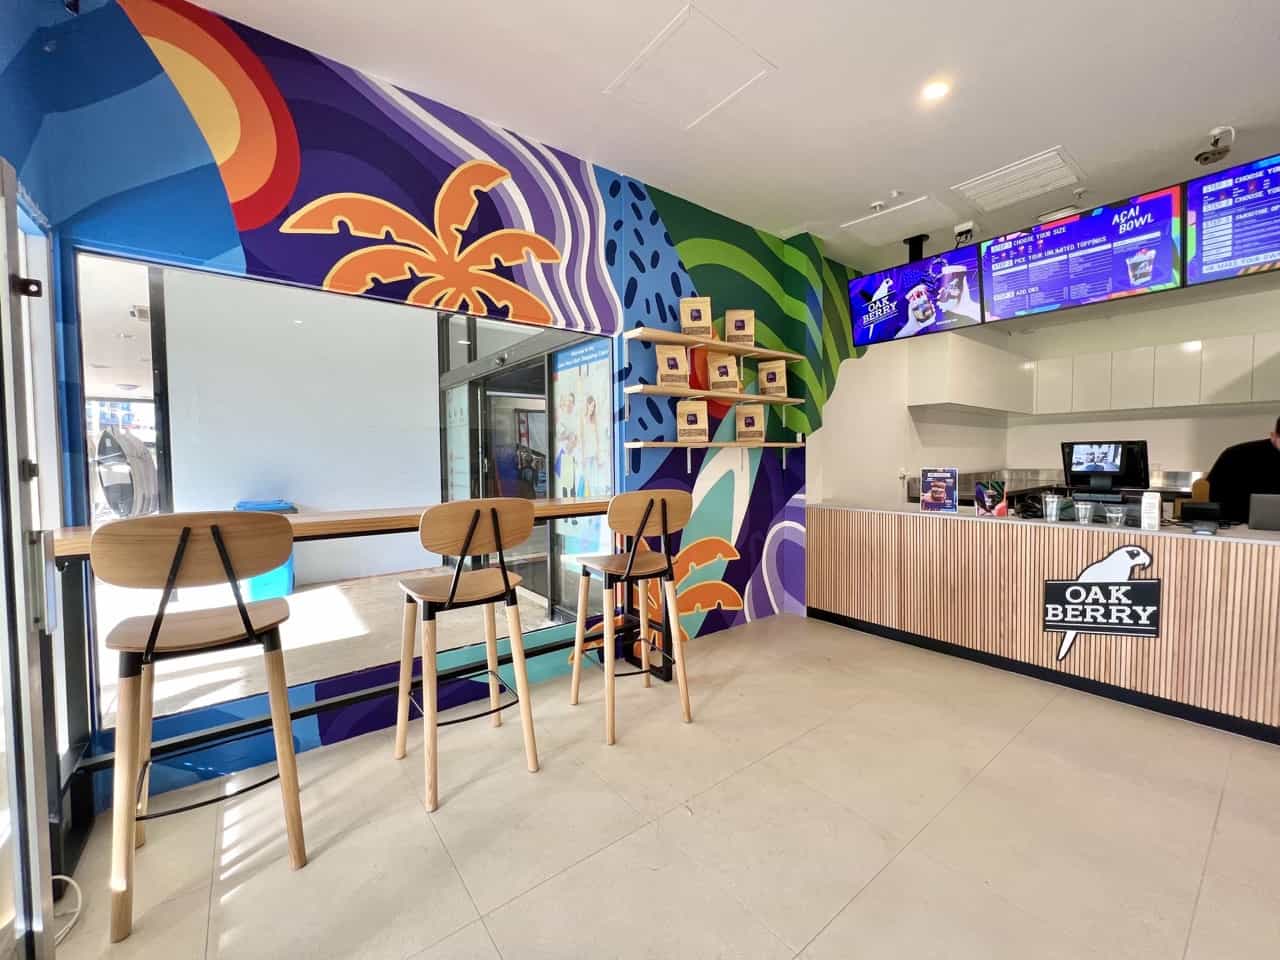 Colourful Abstract Mural inside Acai Bowl Cafe in Perth, Western Australia